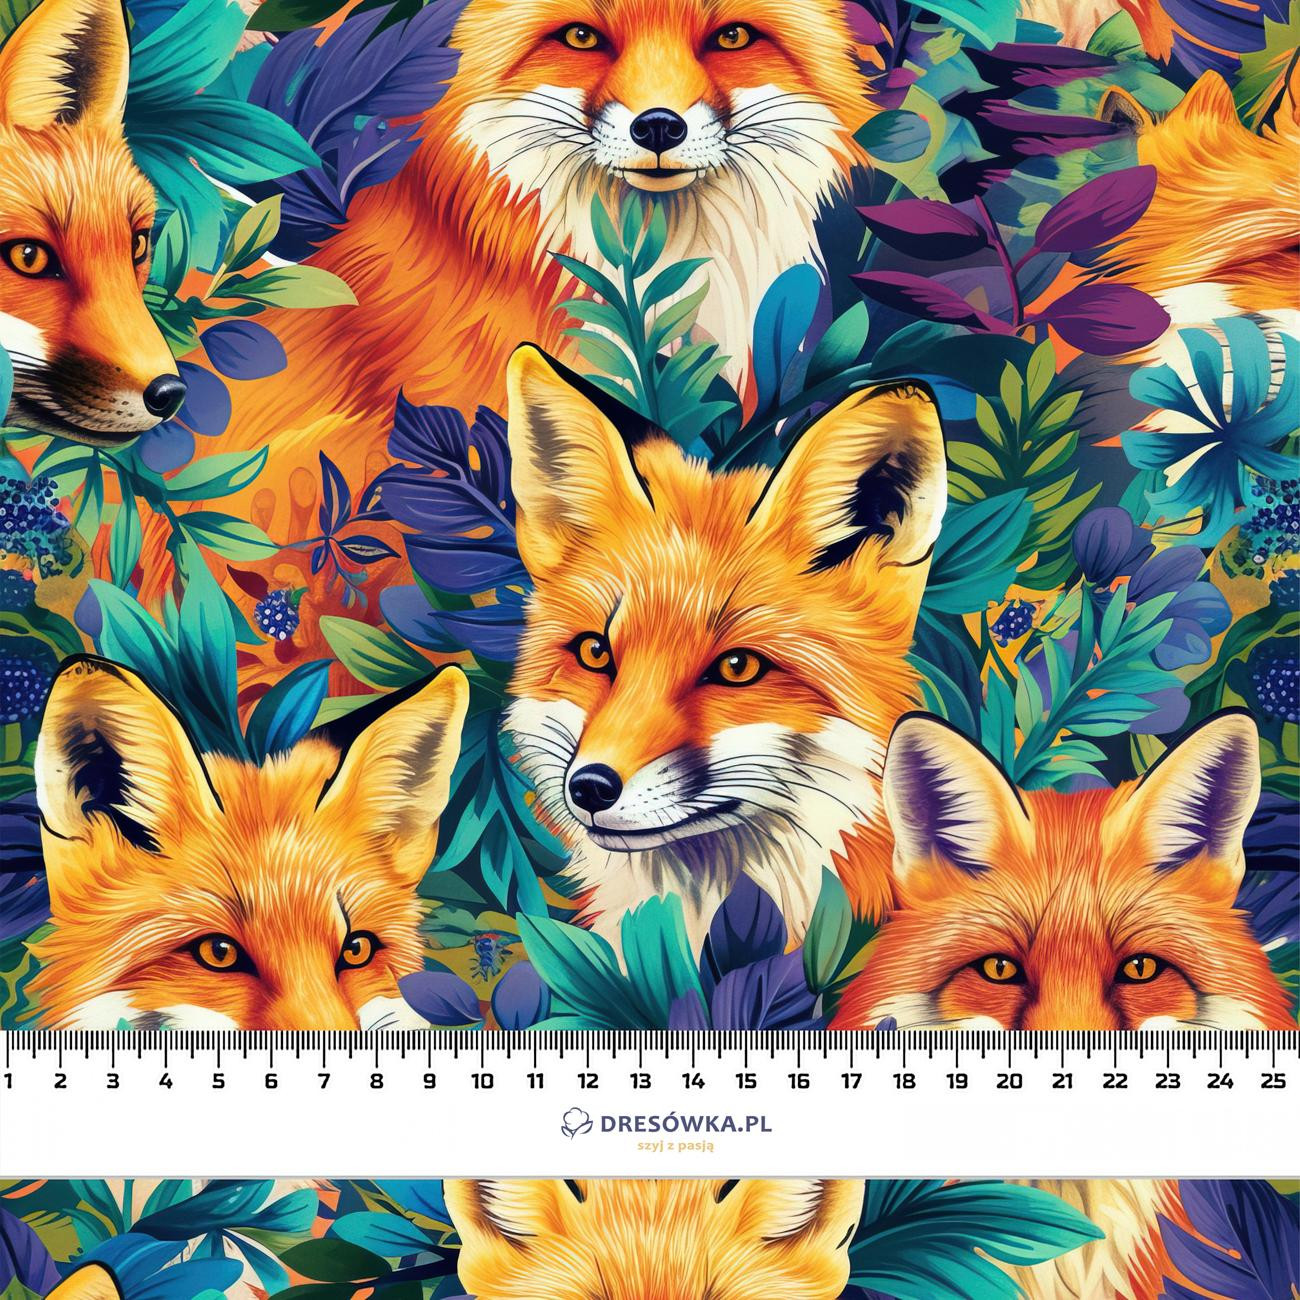 FOXES - Waterproof woven fabric